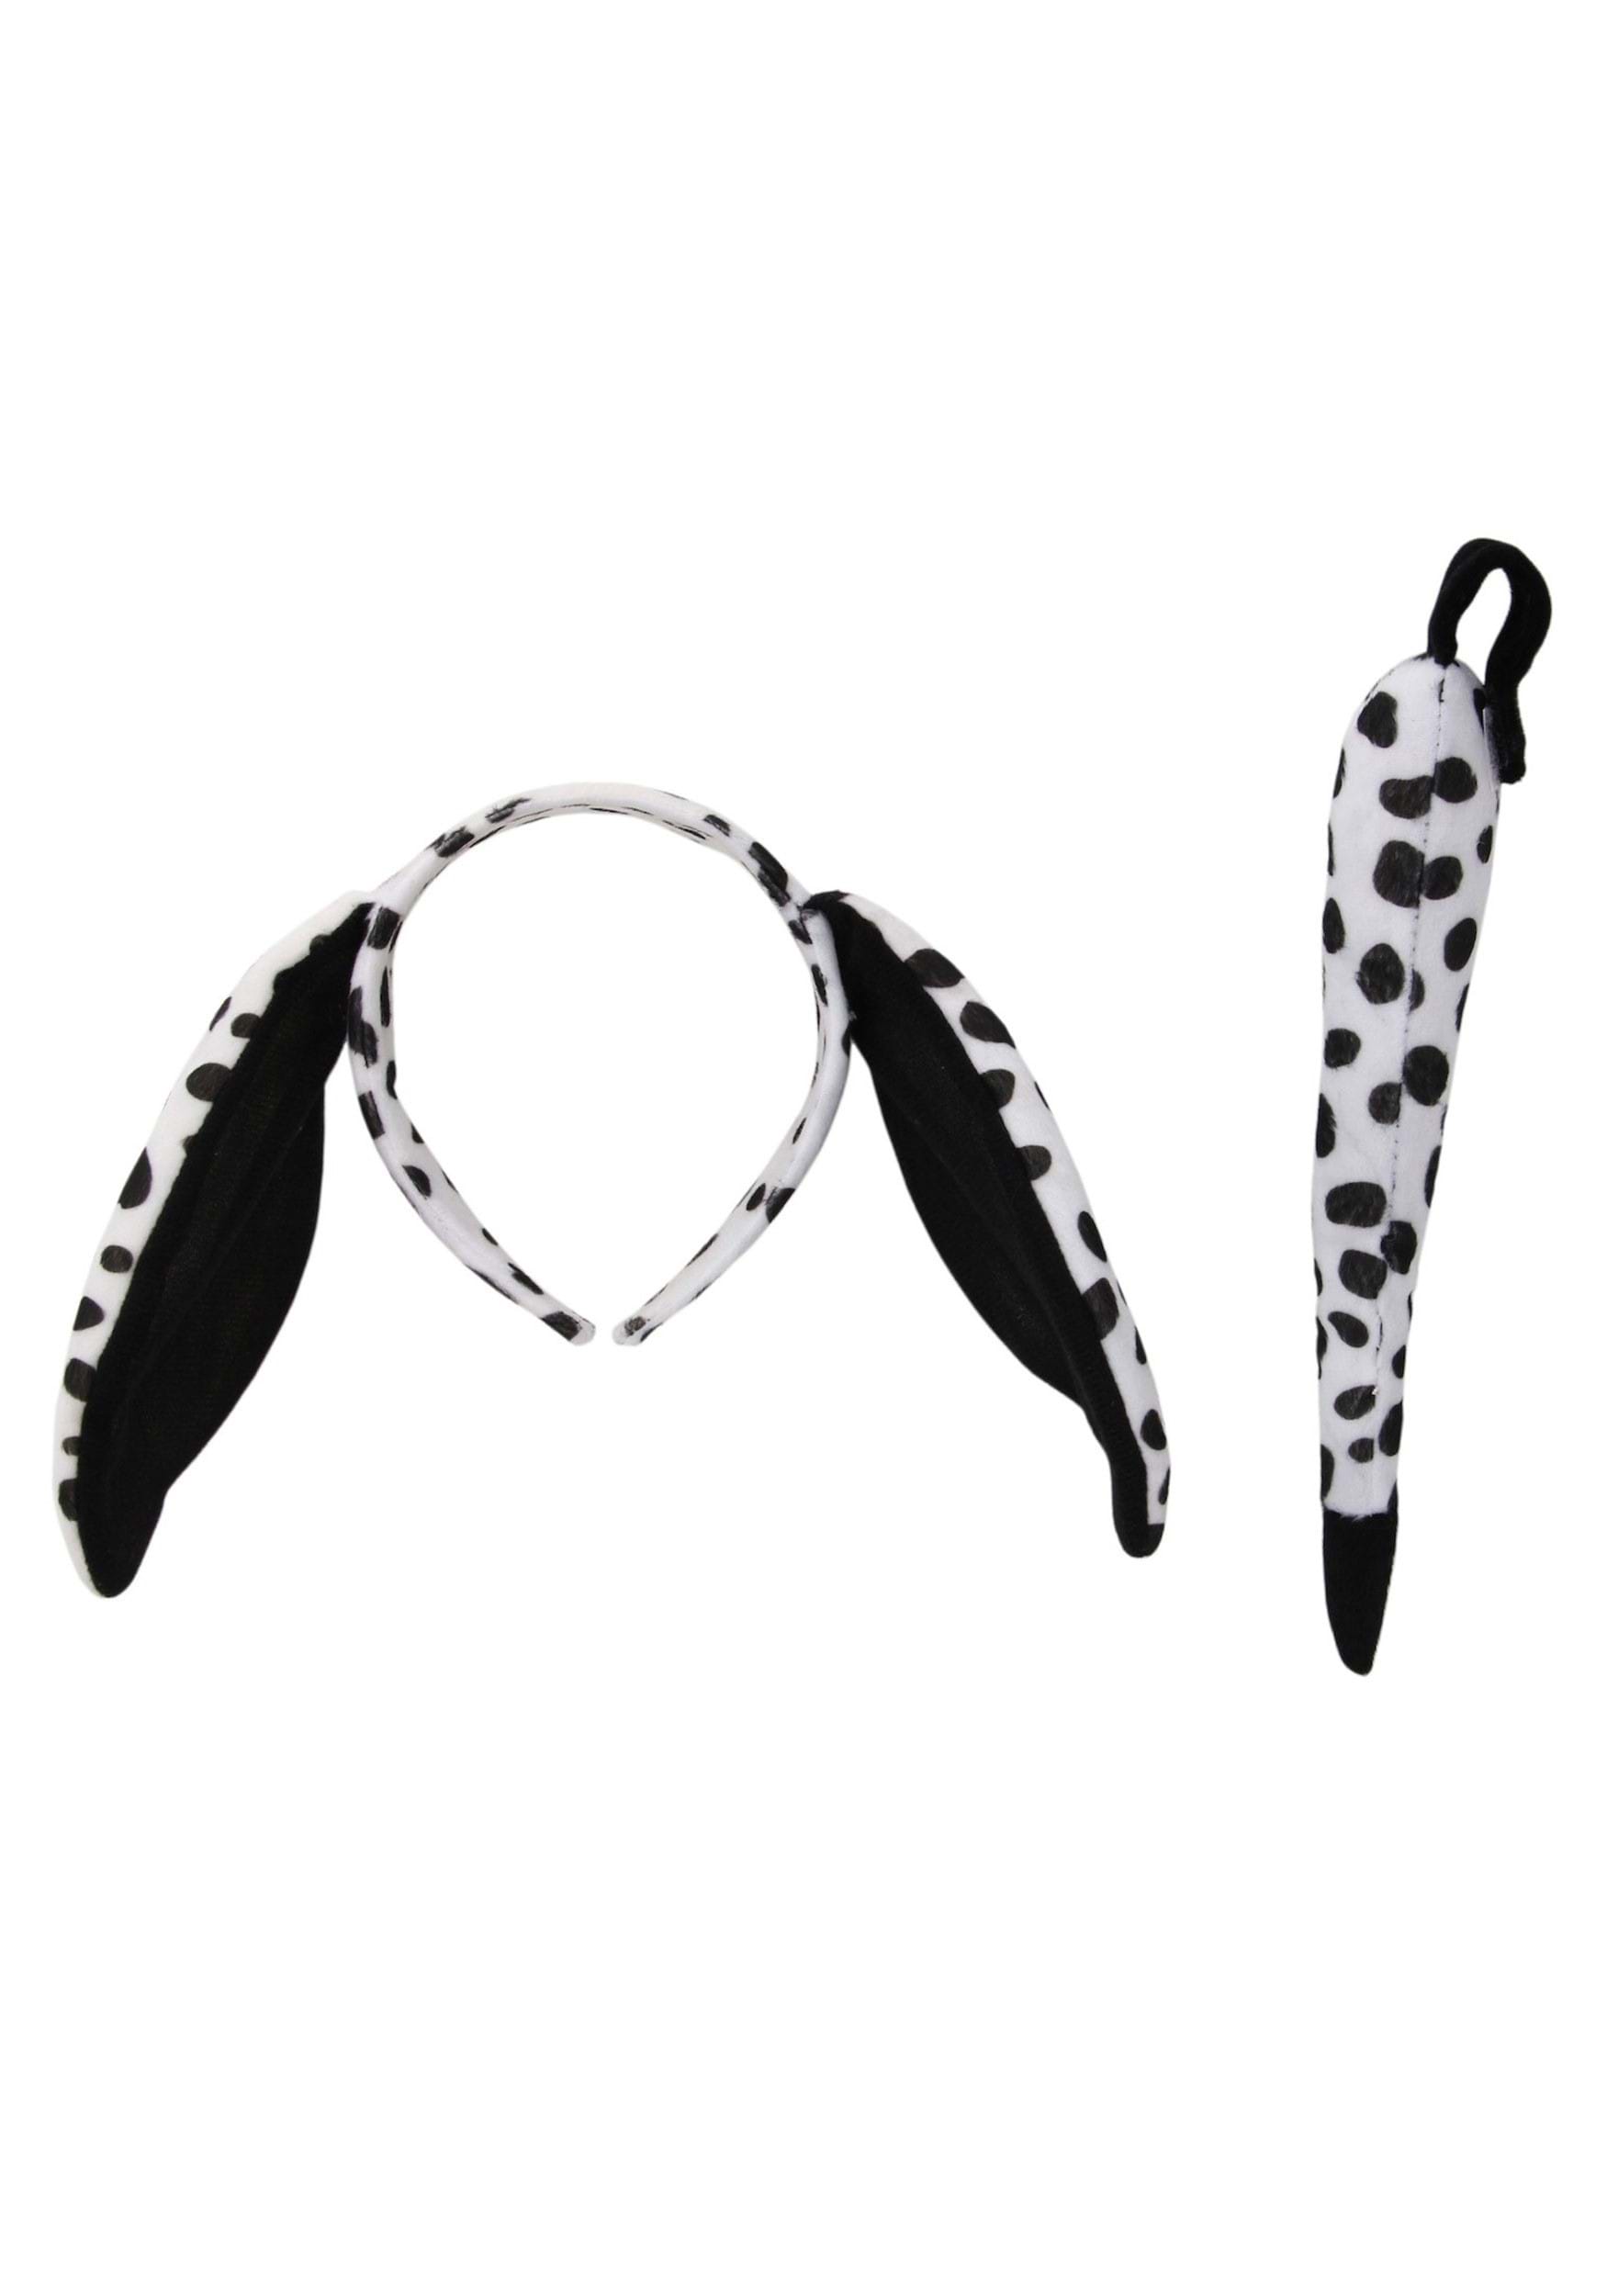 Dalmatian Ears and Tail Set